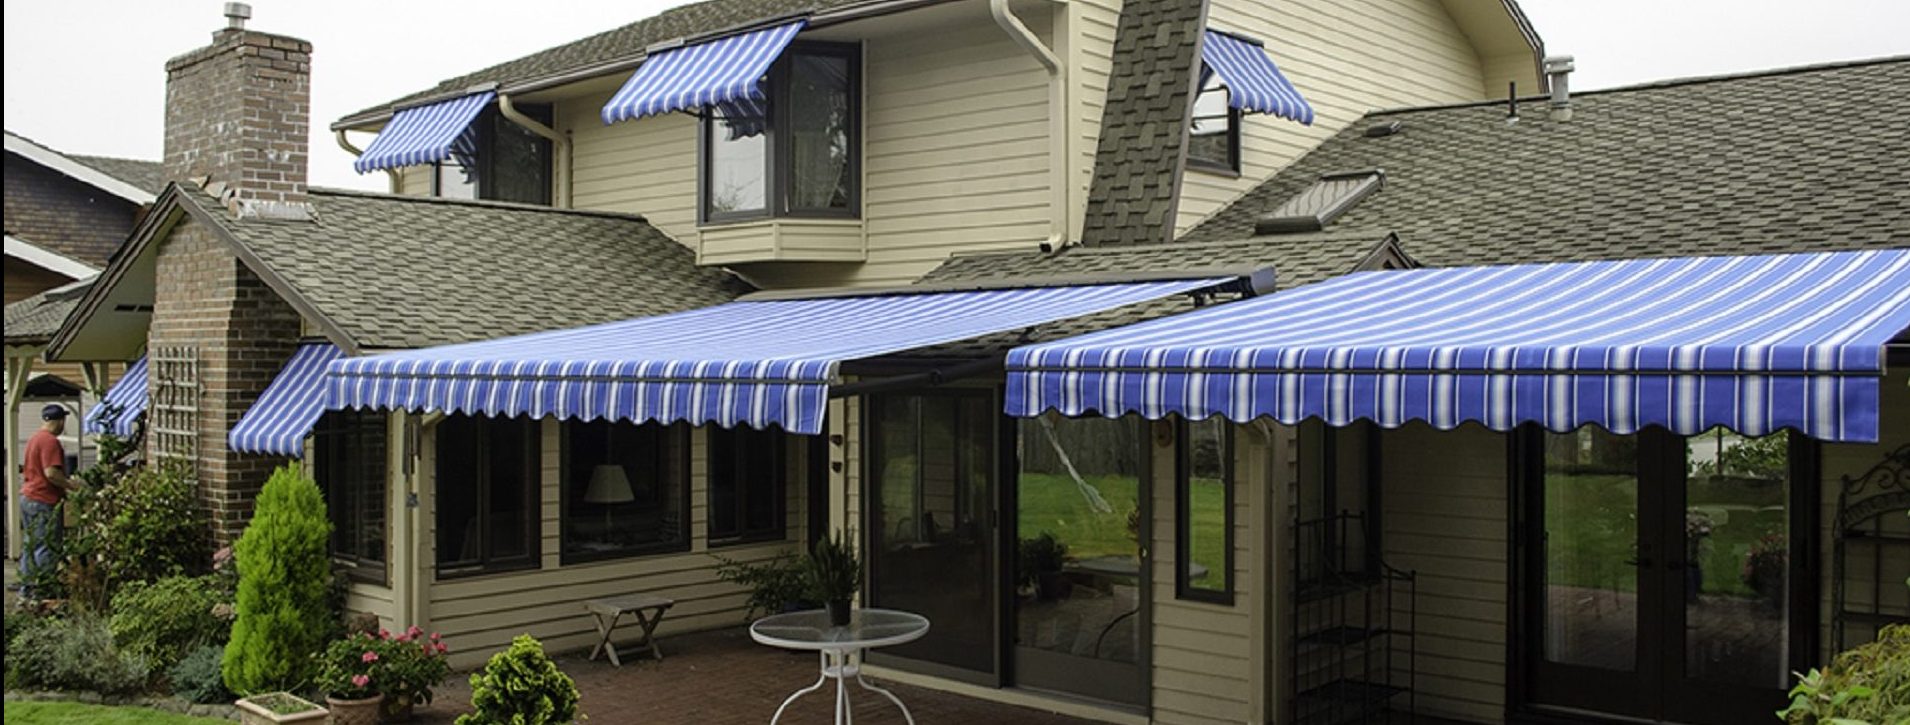 PROTECT YOURSELF & FURNISHINGS FROM DAMAGING UV RAYS!